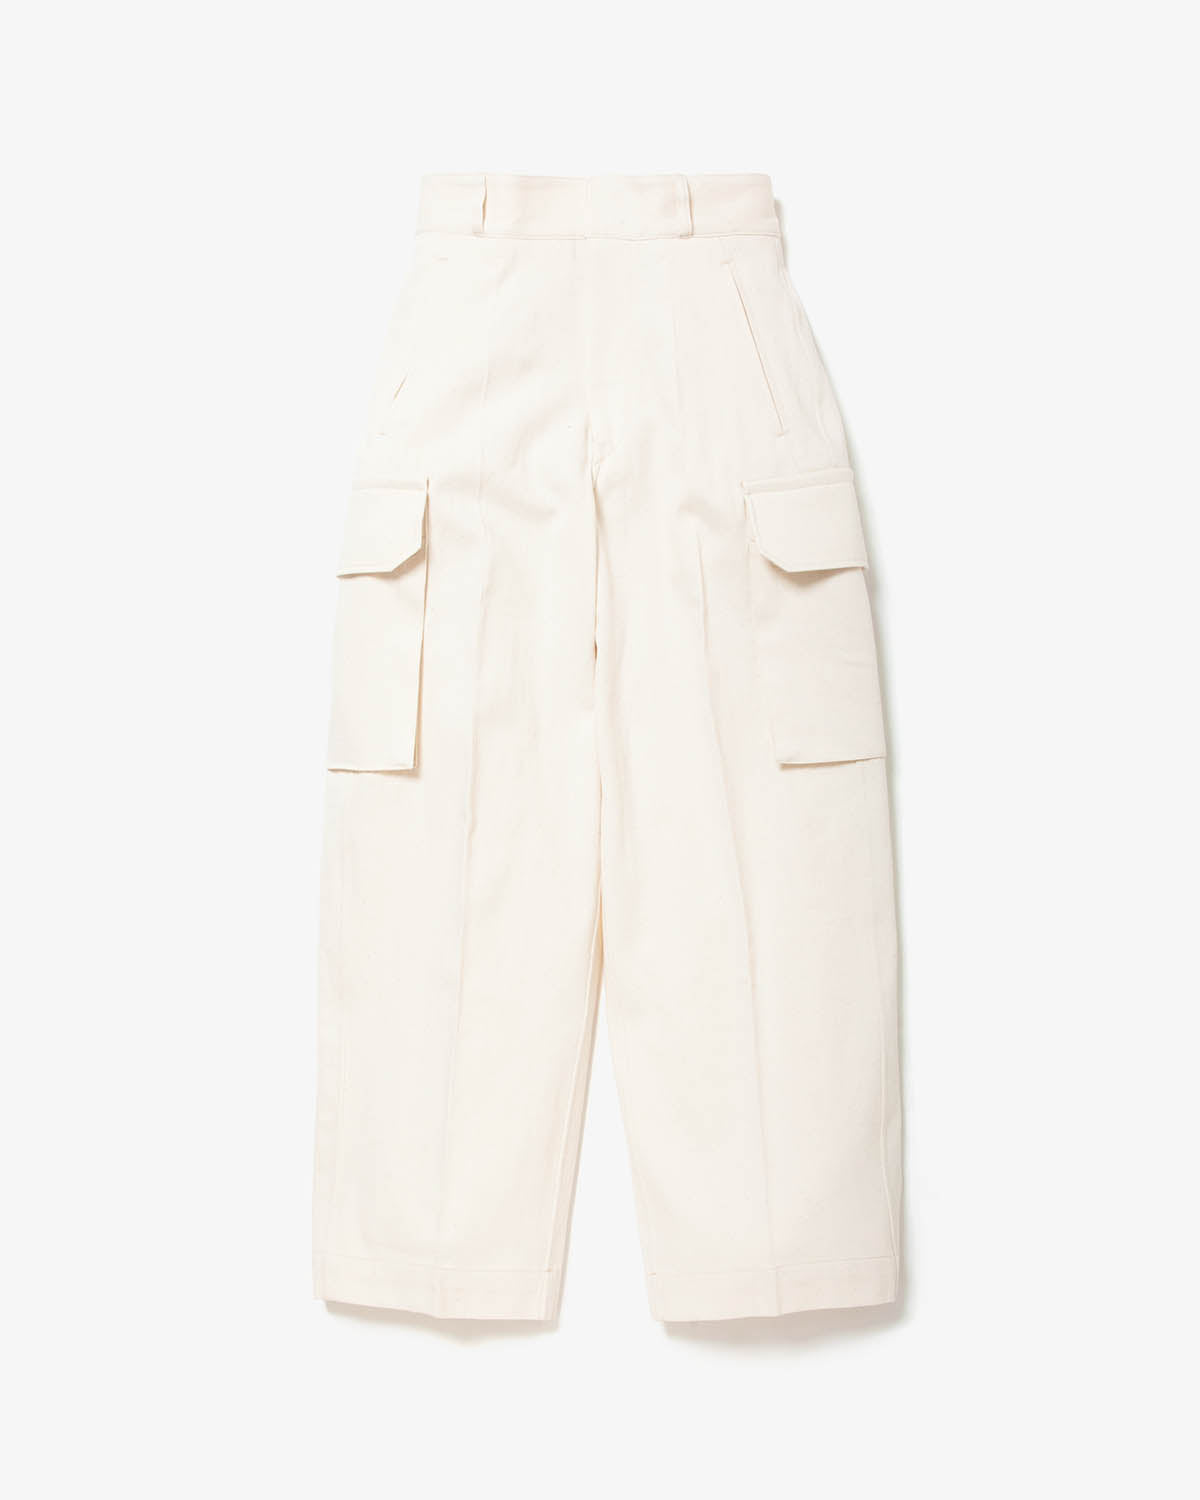 TWILL FRENCH COMBAT TROUSERS